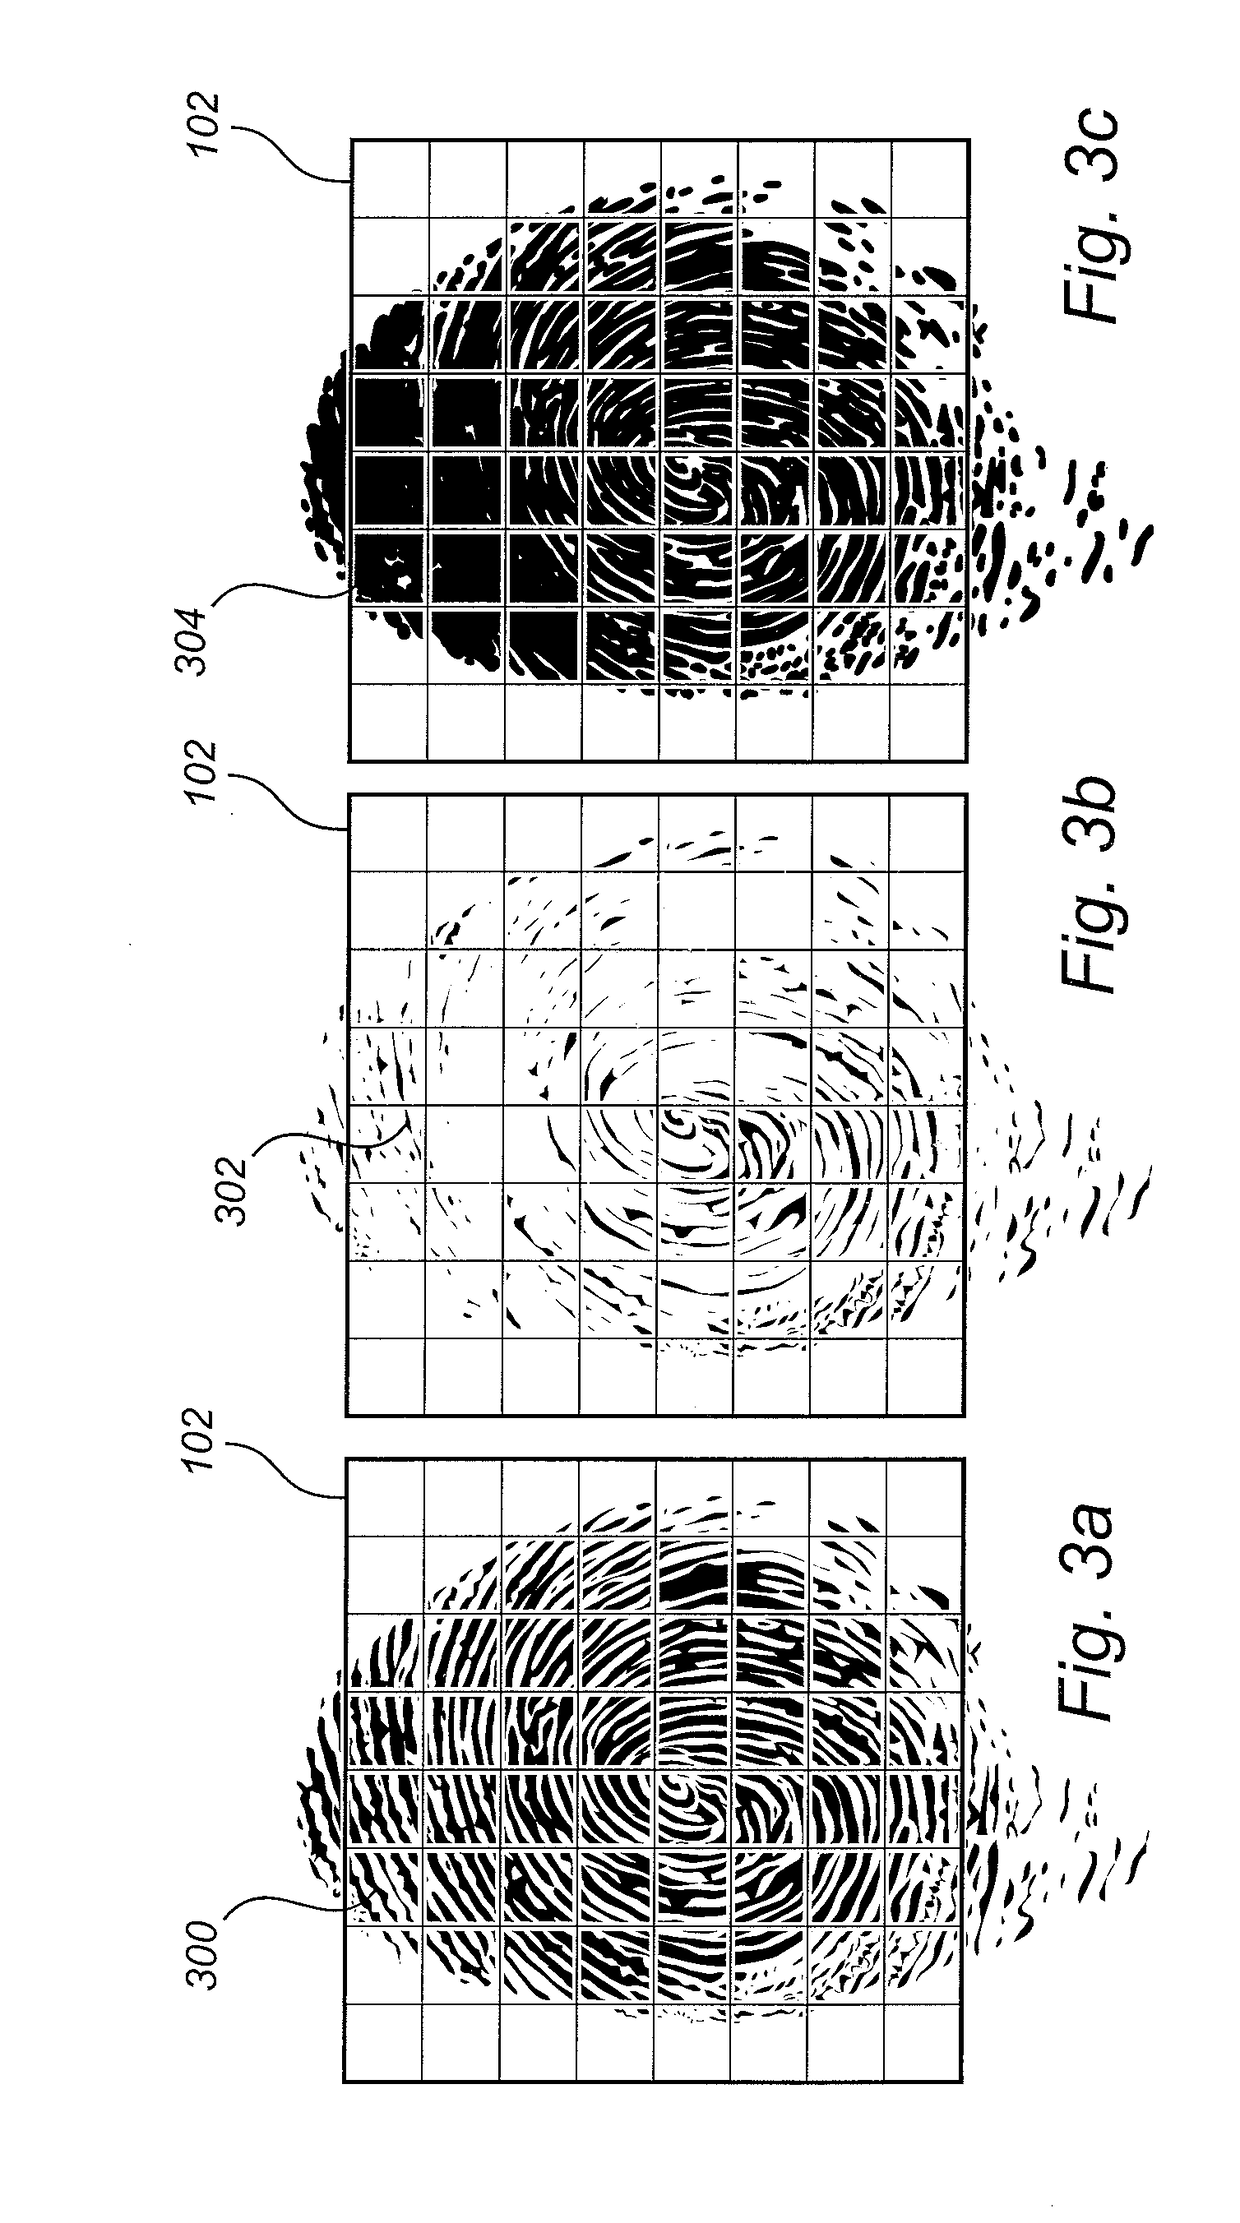 Method and device for forming a fingerprint representation